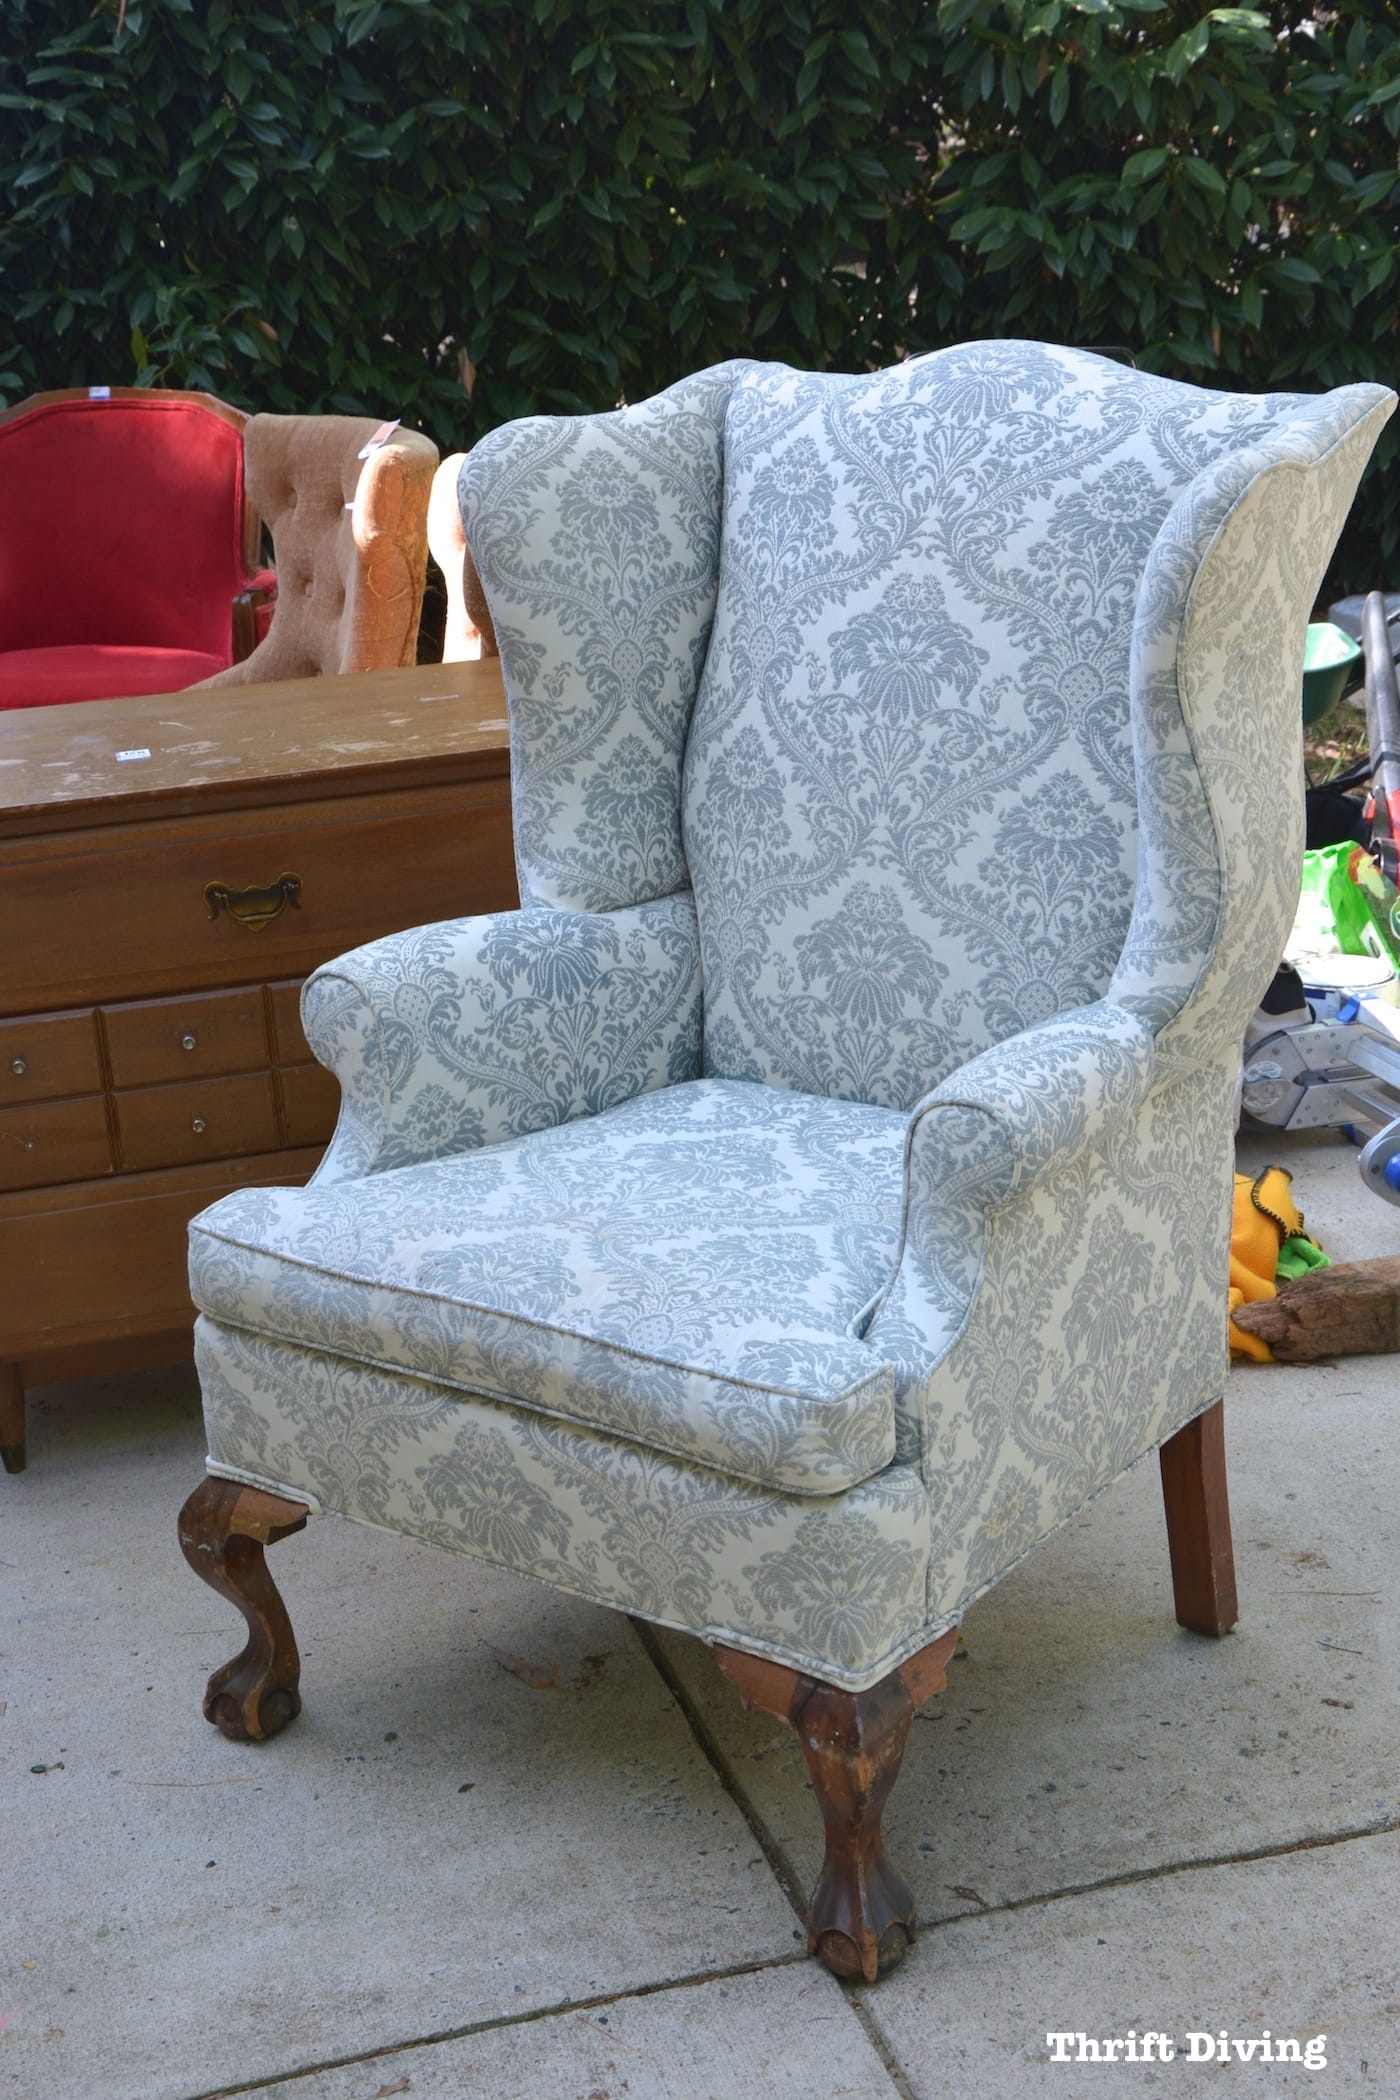 How To Reupholster A Wingback Chair, Reupholster A Chair Cost Uk